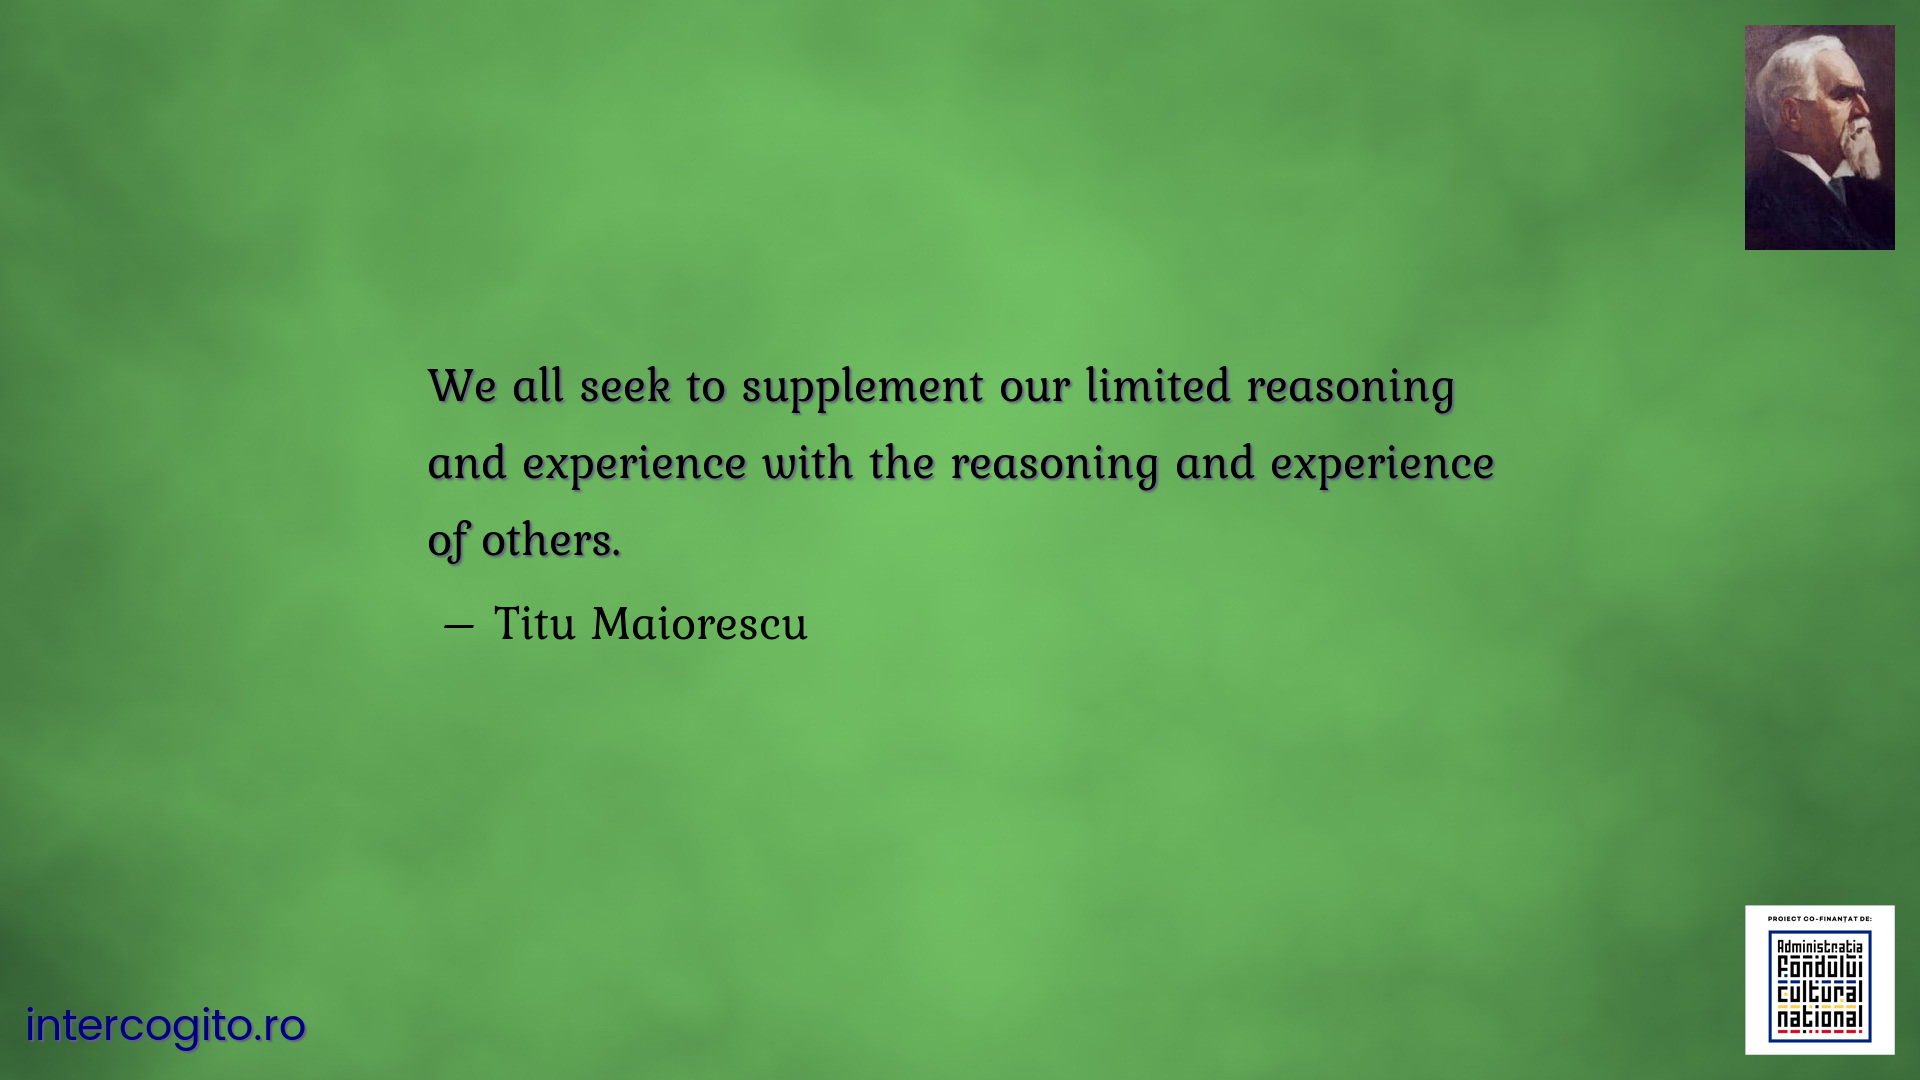 We all seek to supplement our limited reasoning and experience with the reasoning and experience of others.